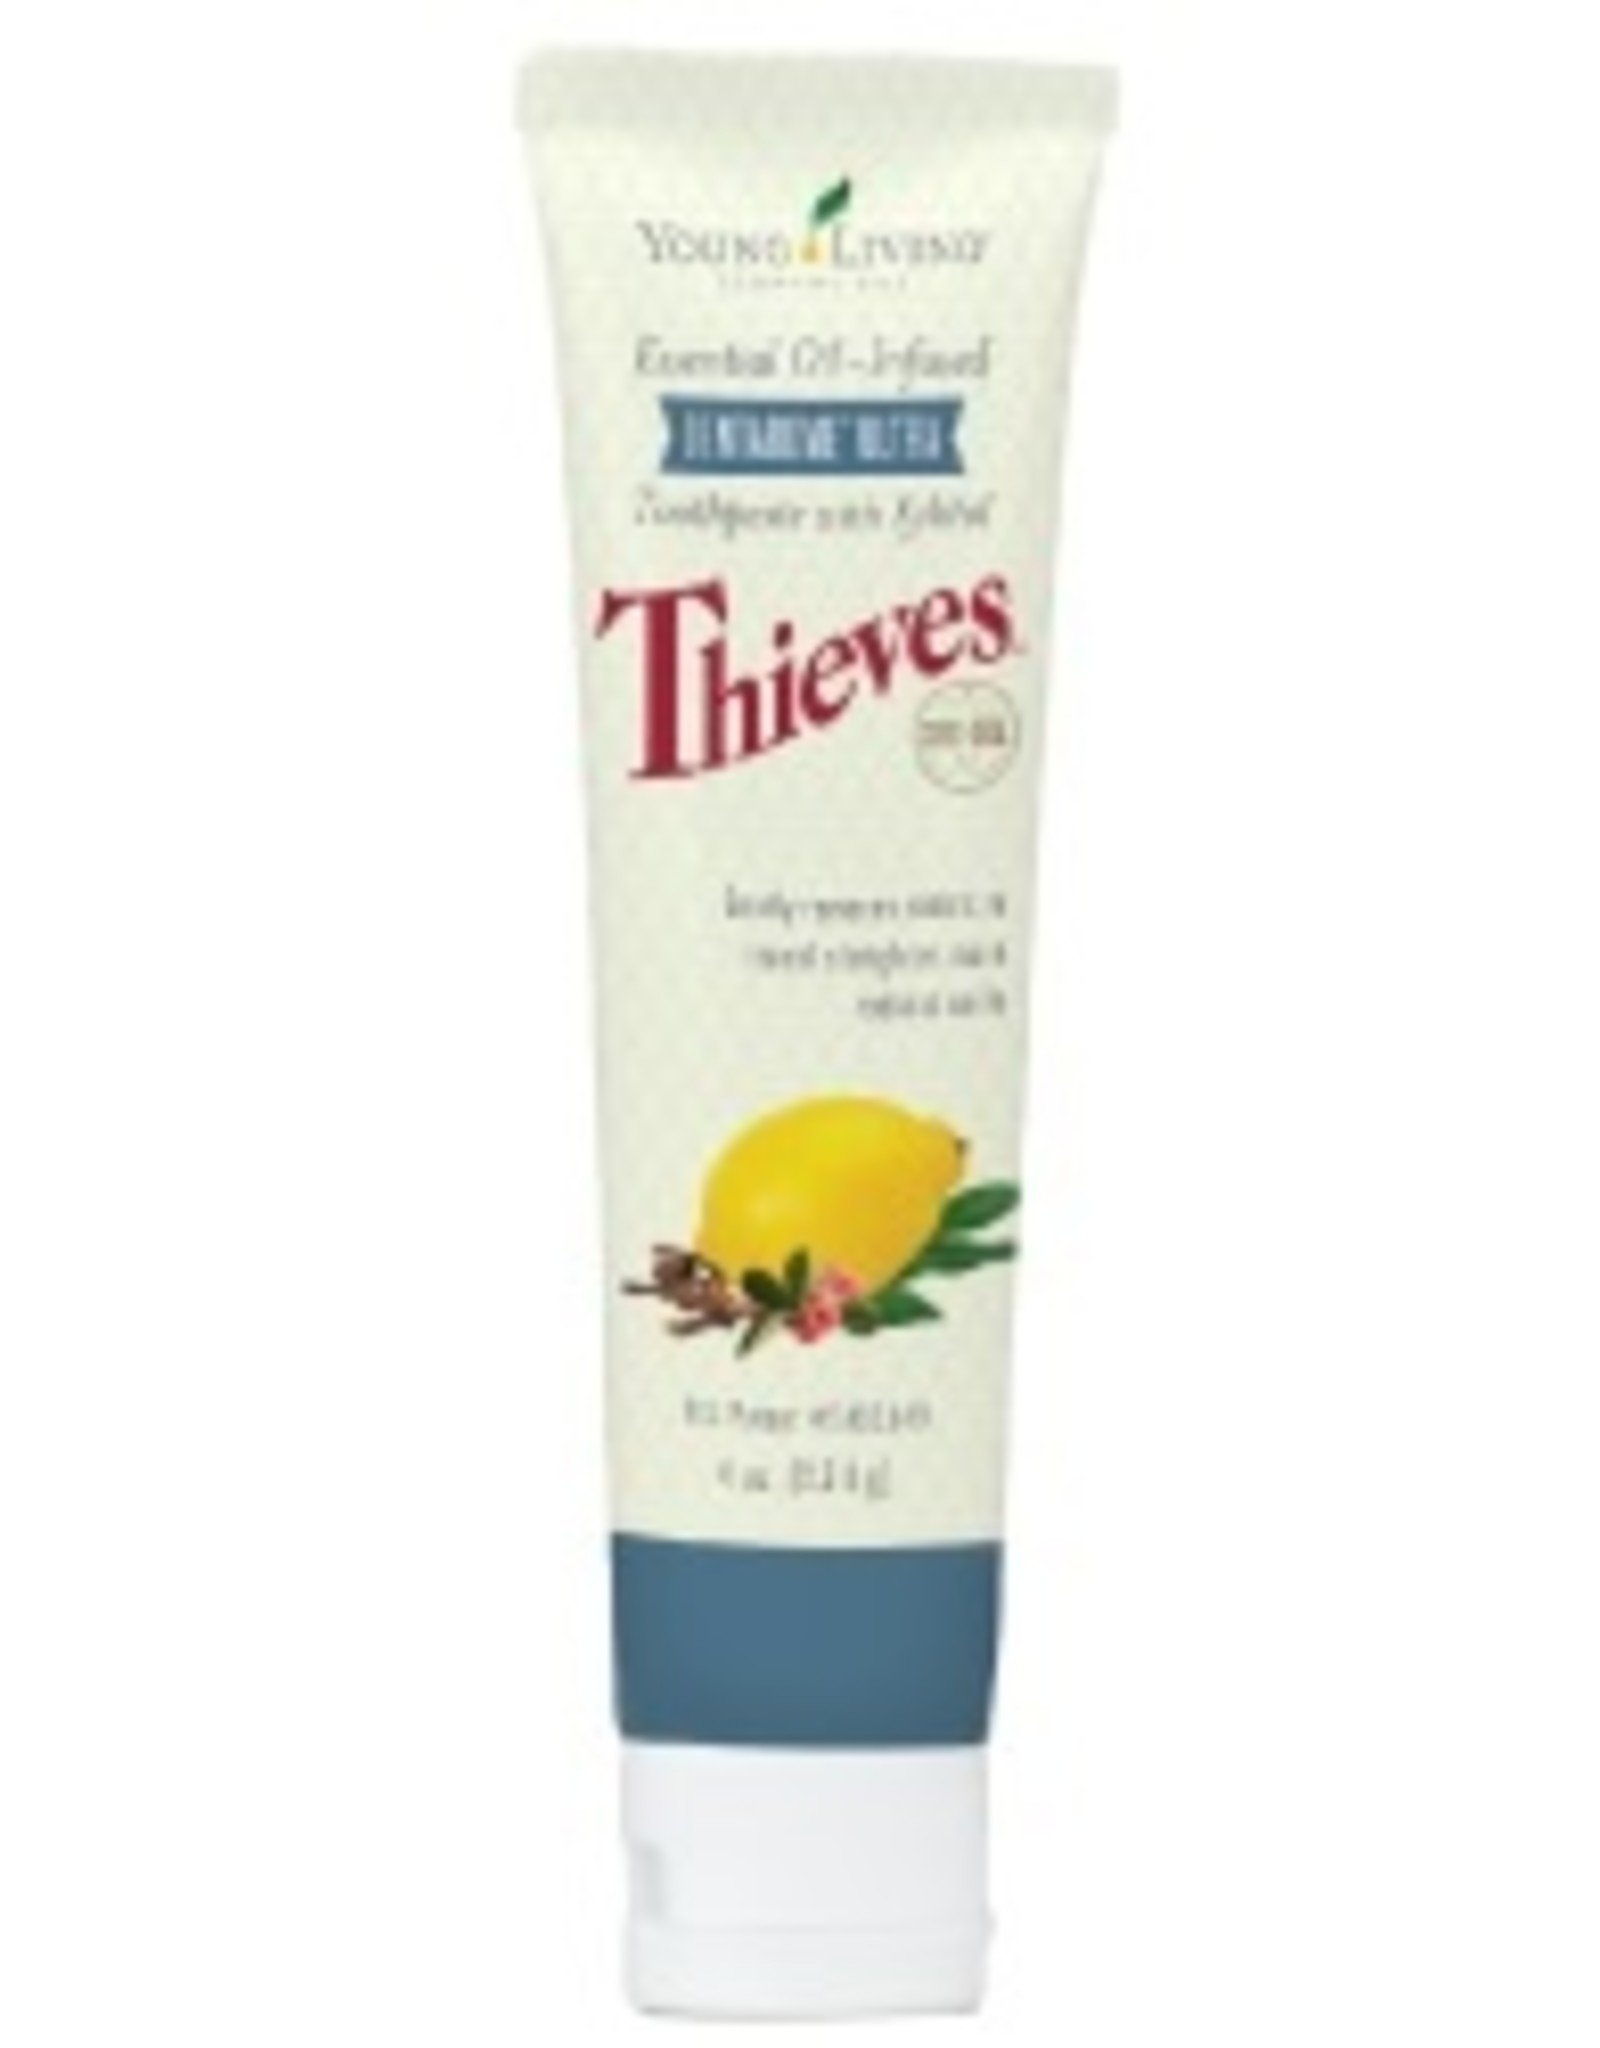 Young Living Thieves Dentarome Toothpaste